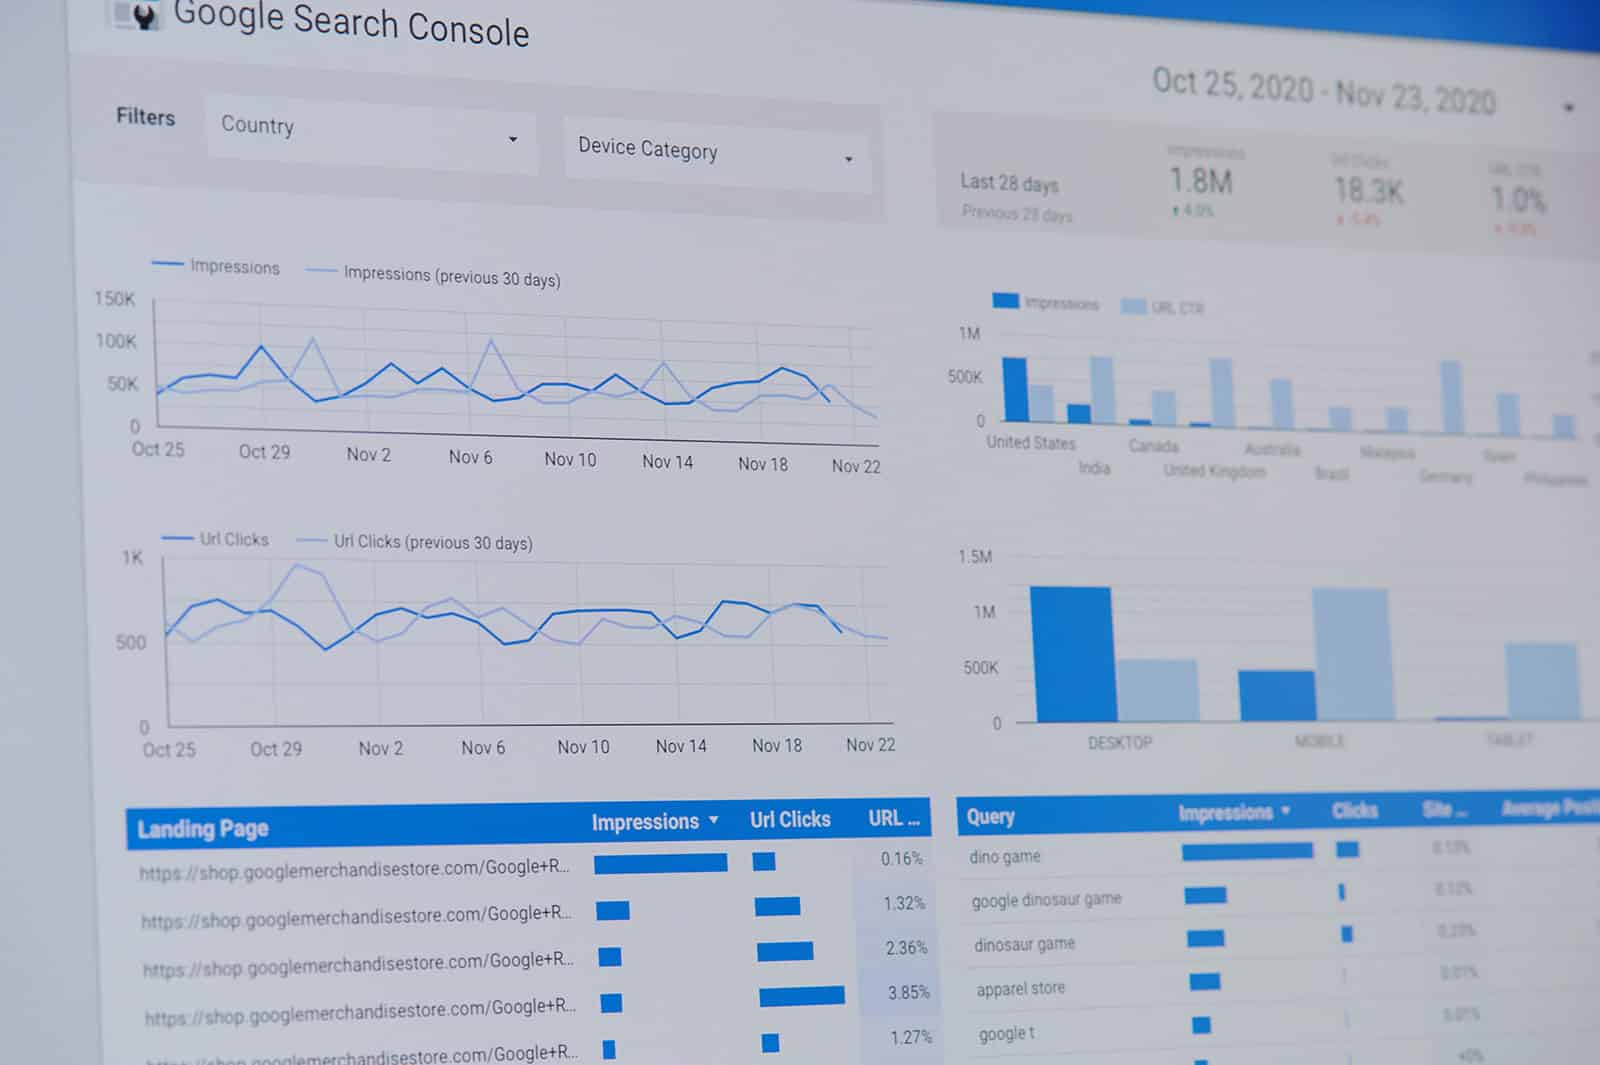 John Muller Explains the Disparities in Search Console Query Reports